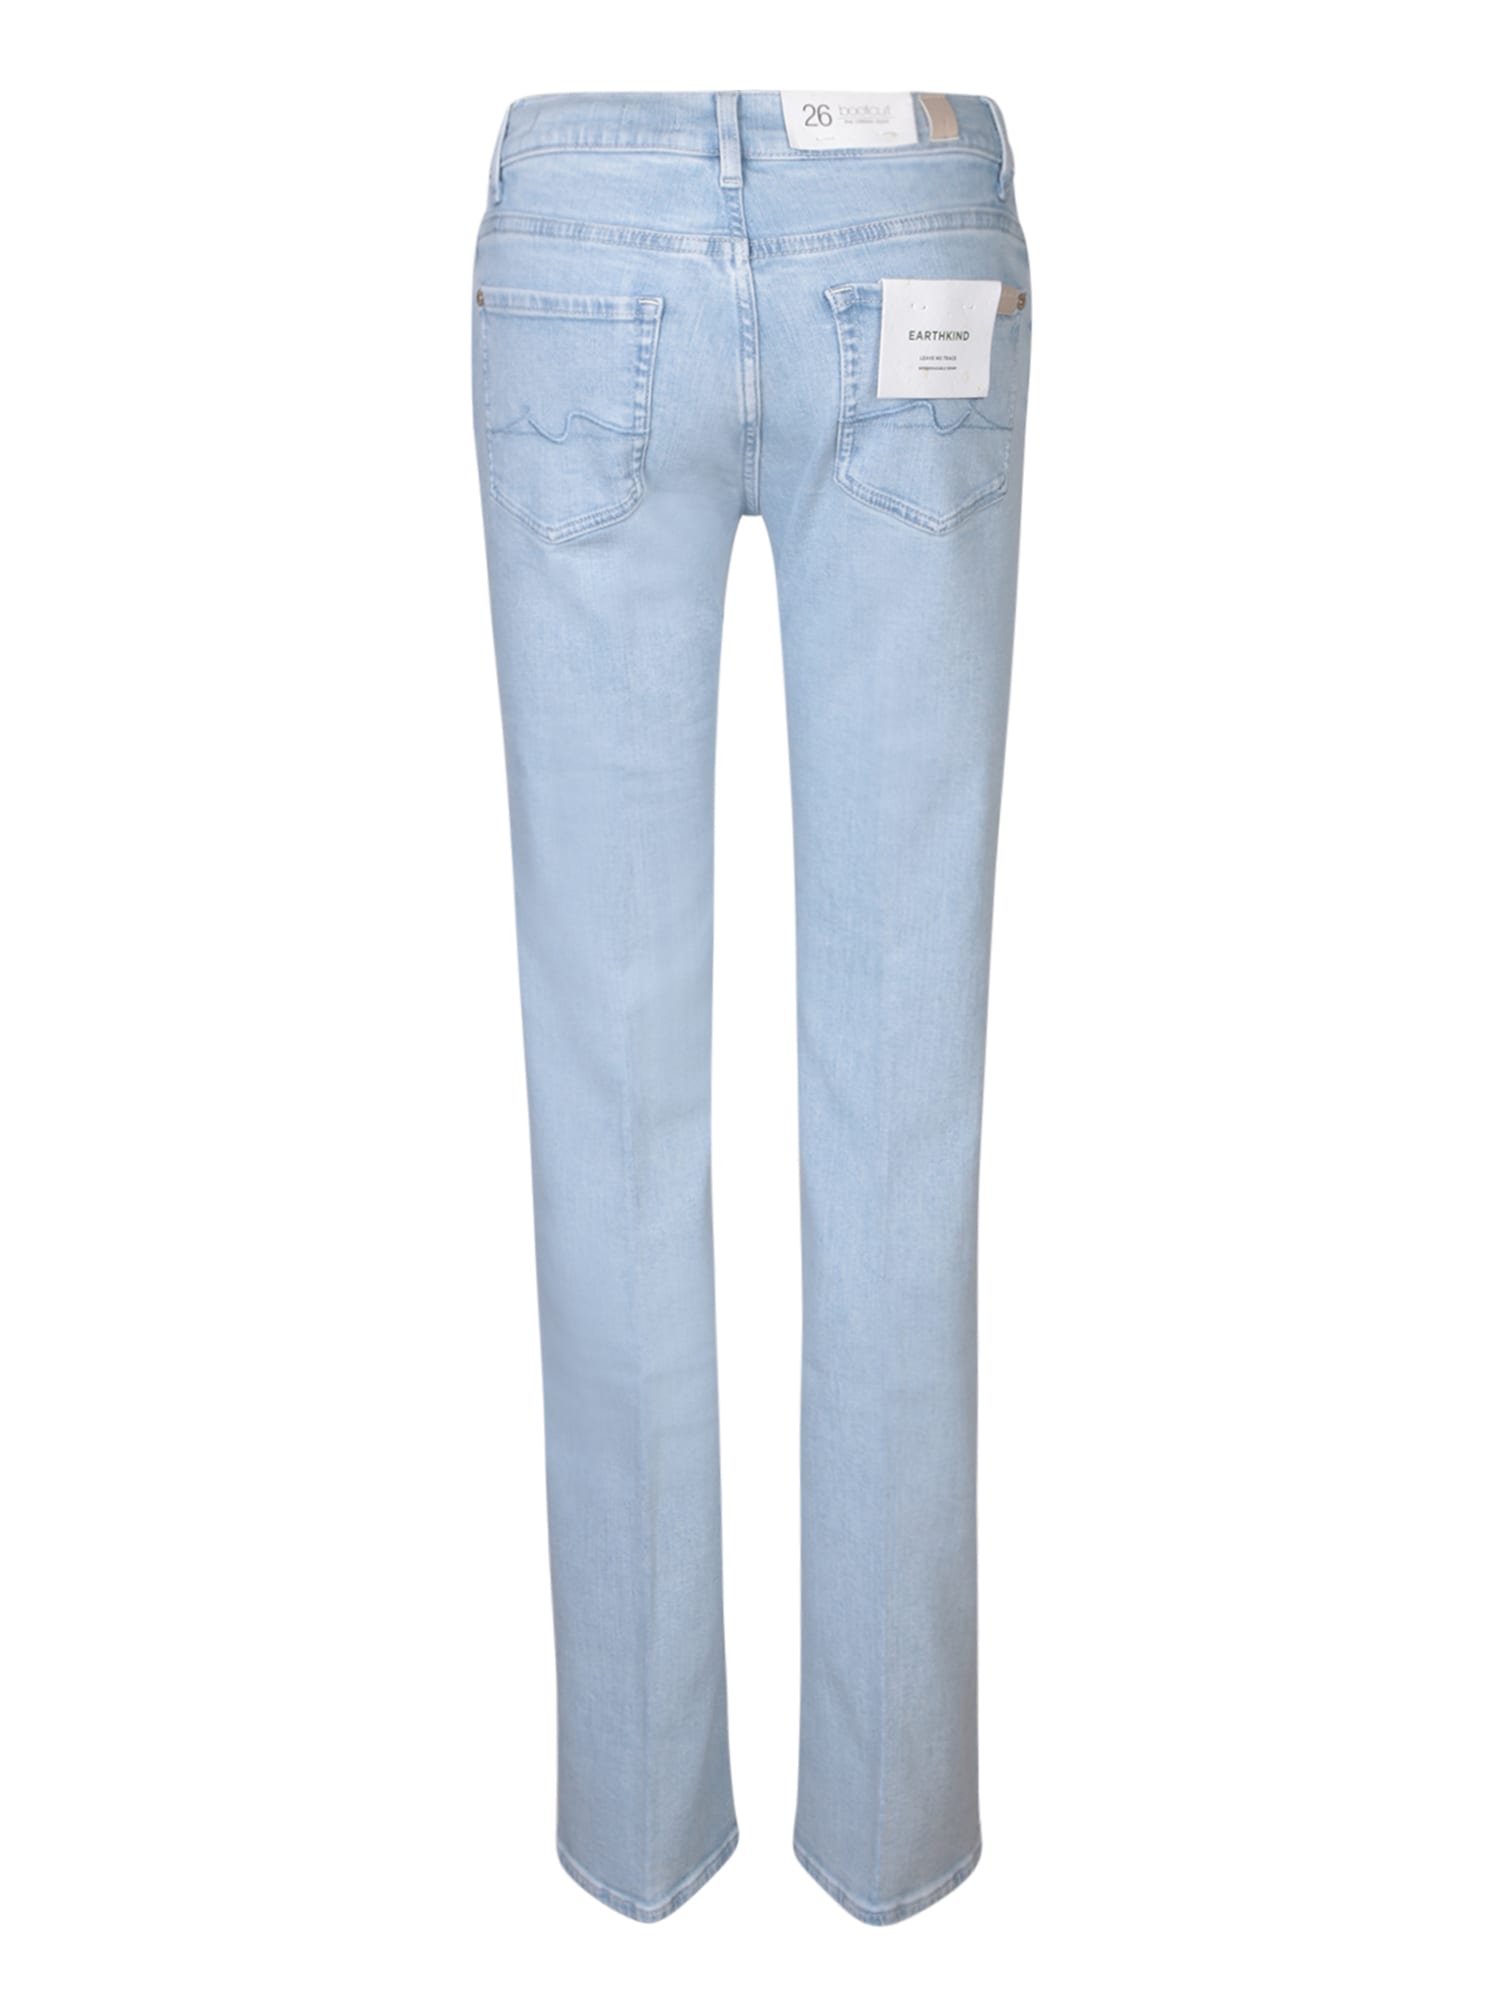 Shop 7 For All Mankind Bootcut Light Blue Jeans